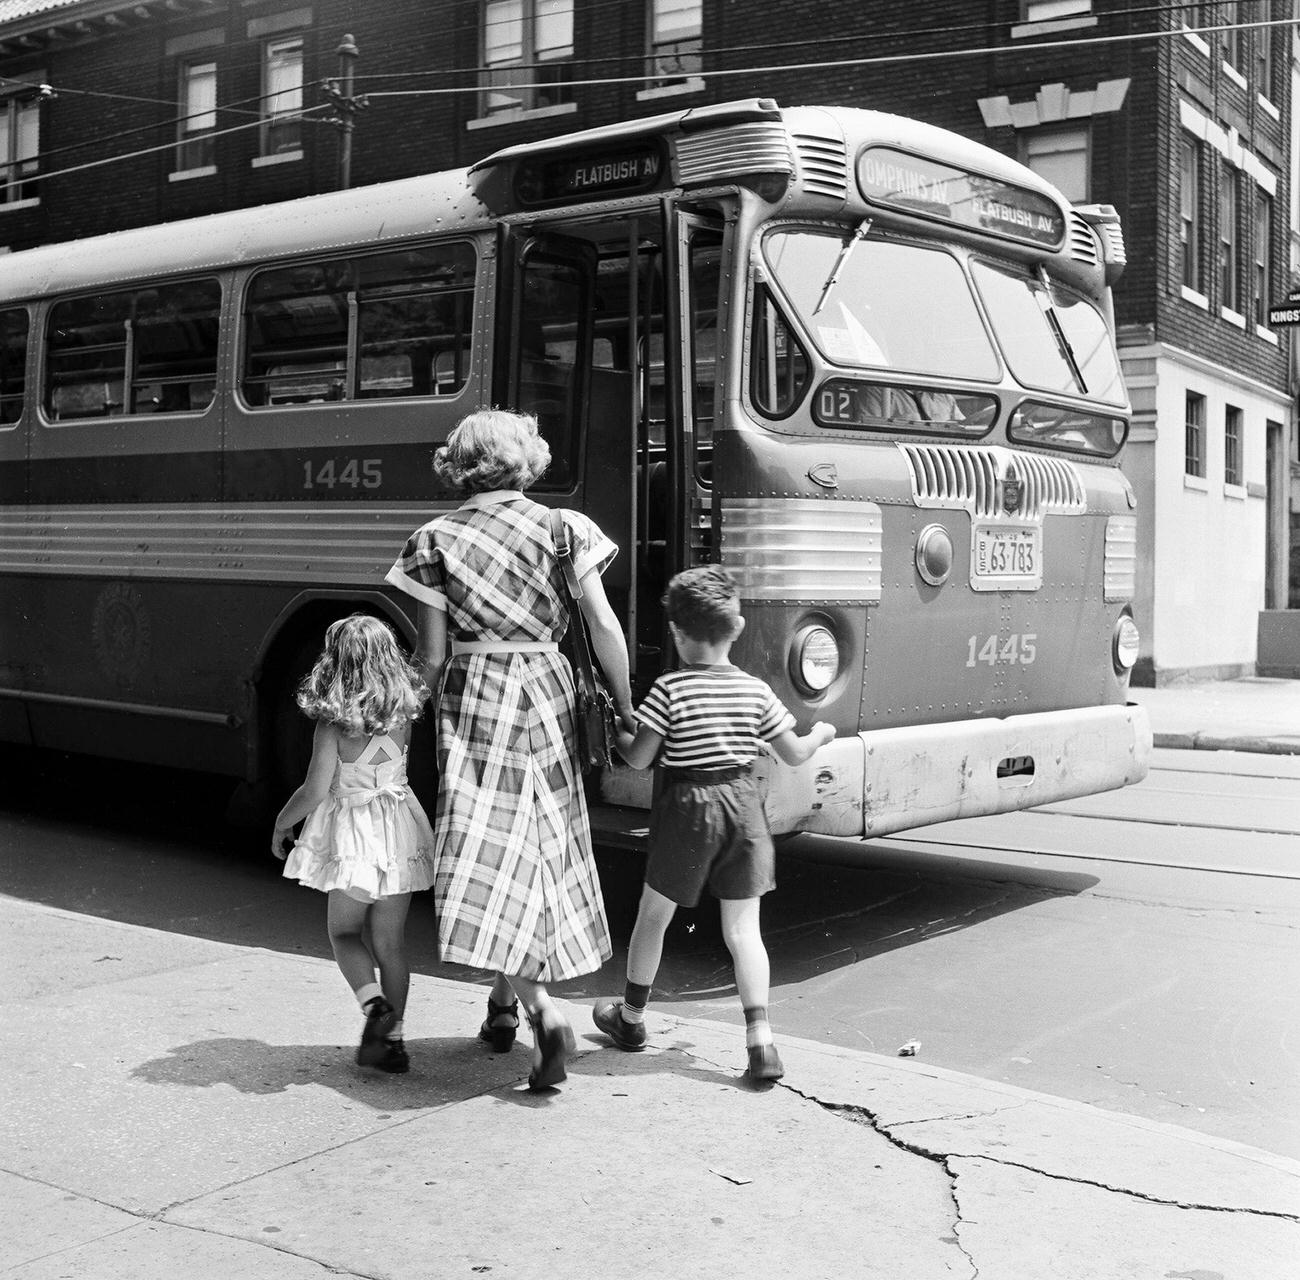 A Mother Leads Her Two Young Children, A Boy And A Girl, Towards The Flatbush Avenue Bus, Coney Island, New 1948